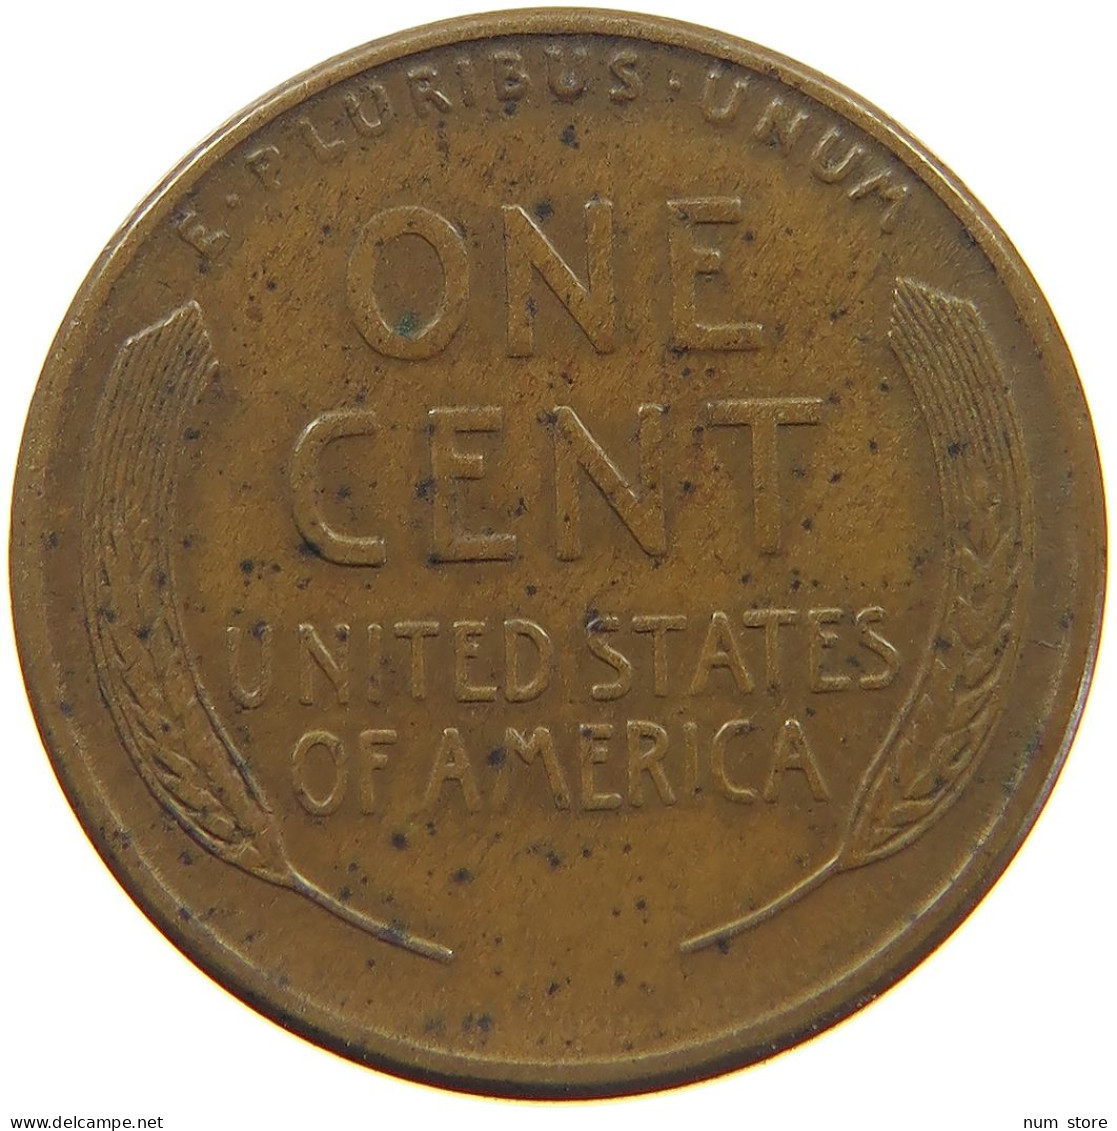 UNITED STATES OF AMERICA CENT 1911 S Lincoln Wheat #t001 0177 - 1909-1958: Lincoln, Wheat Ears Reverse